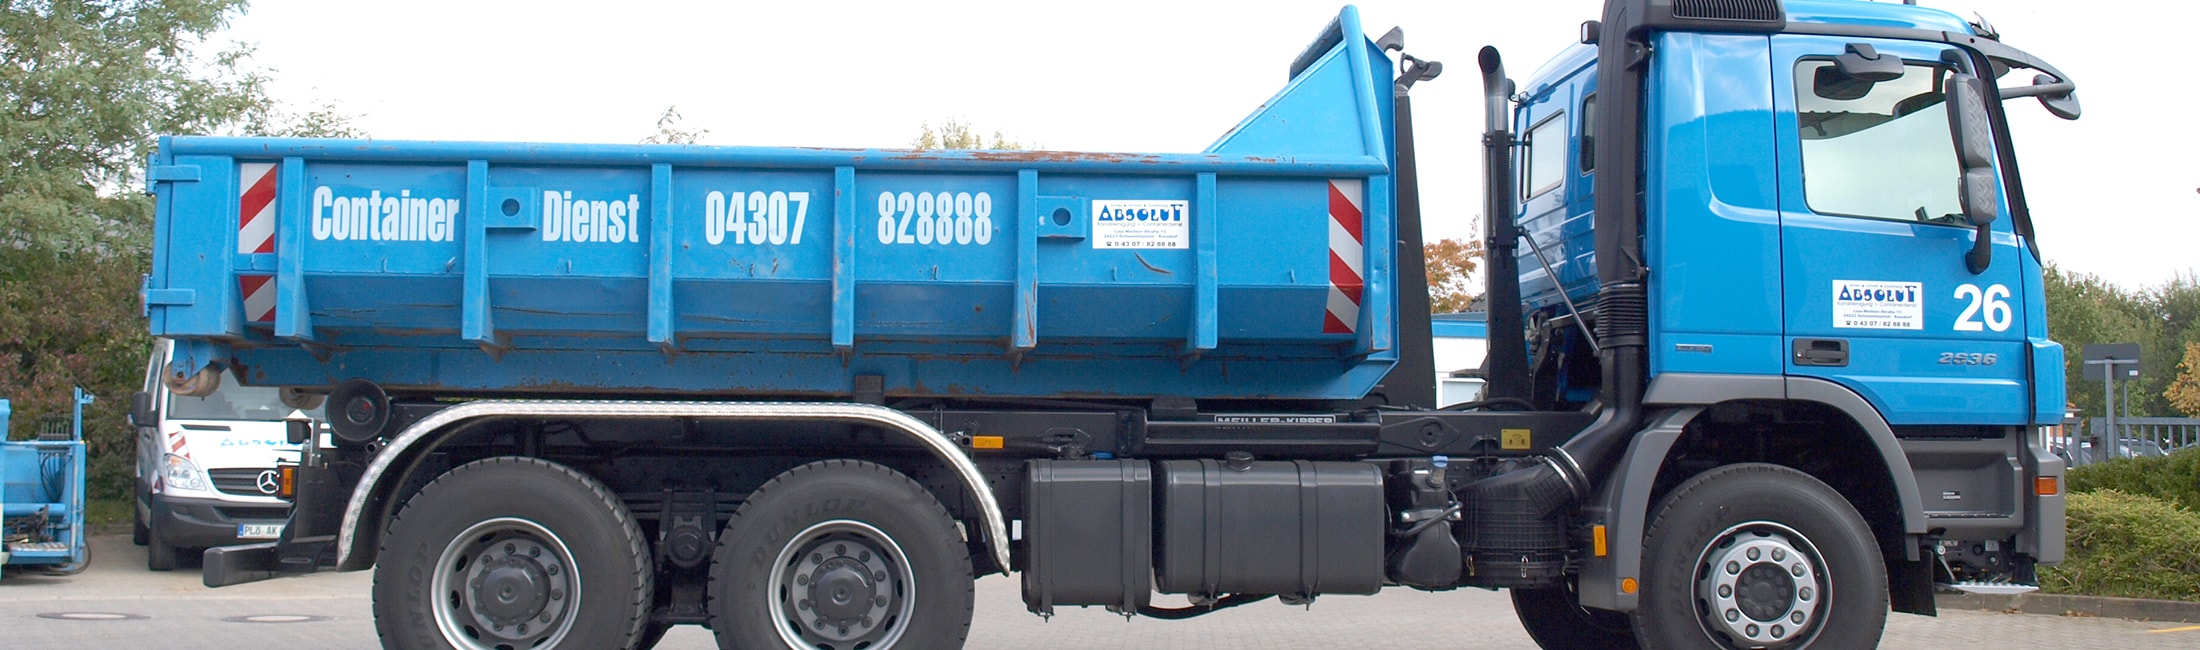 Absolut Container LKW